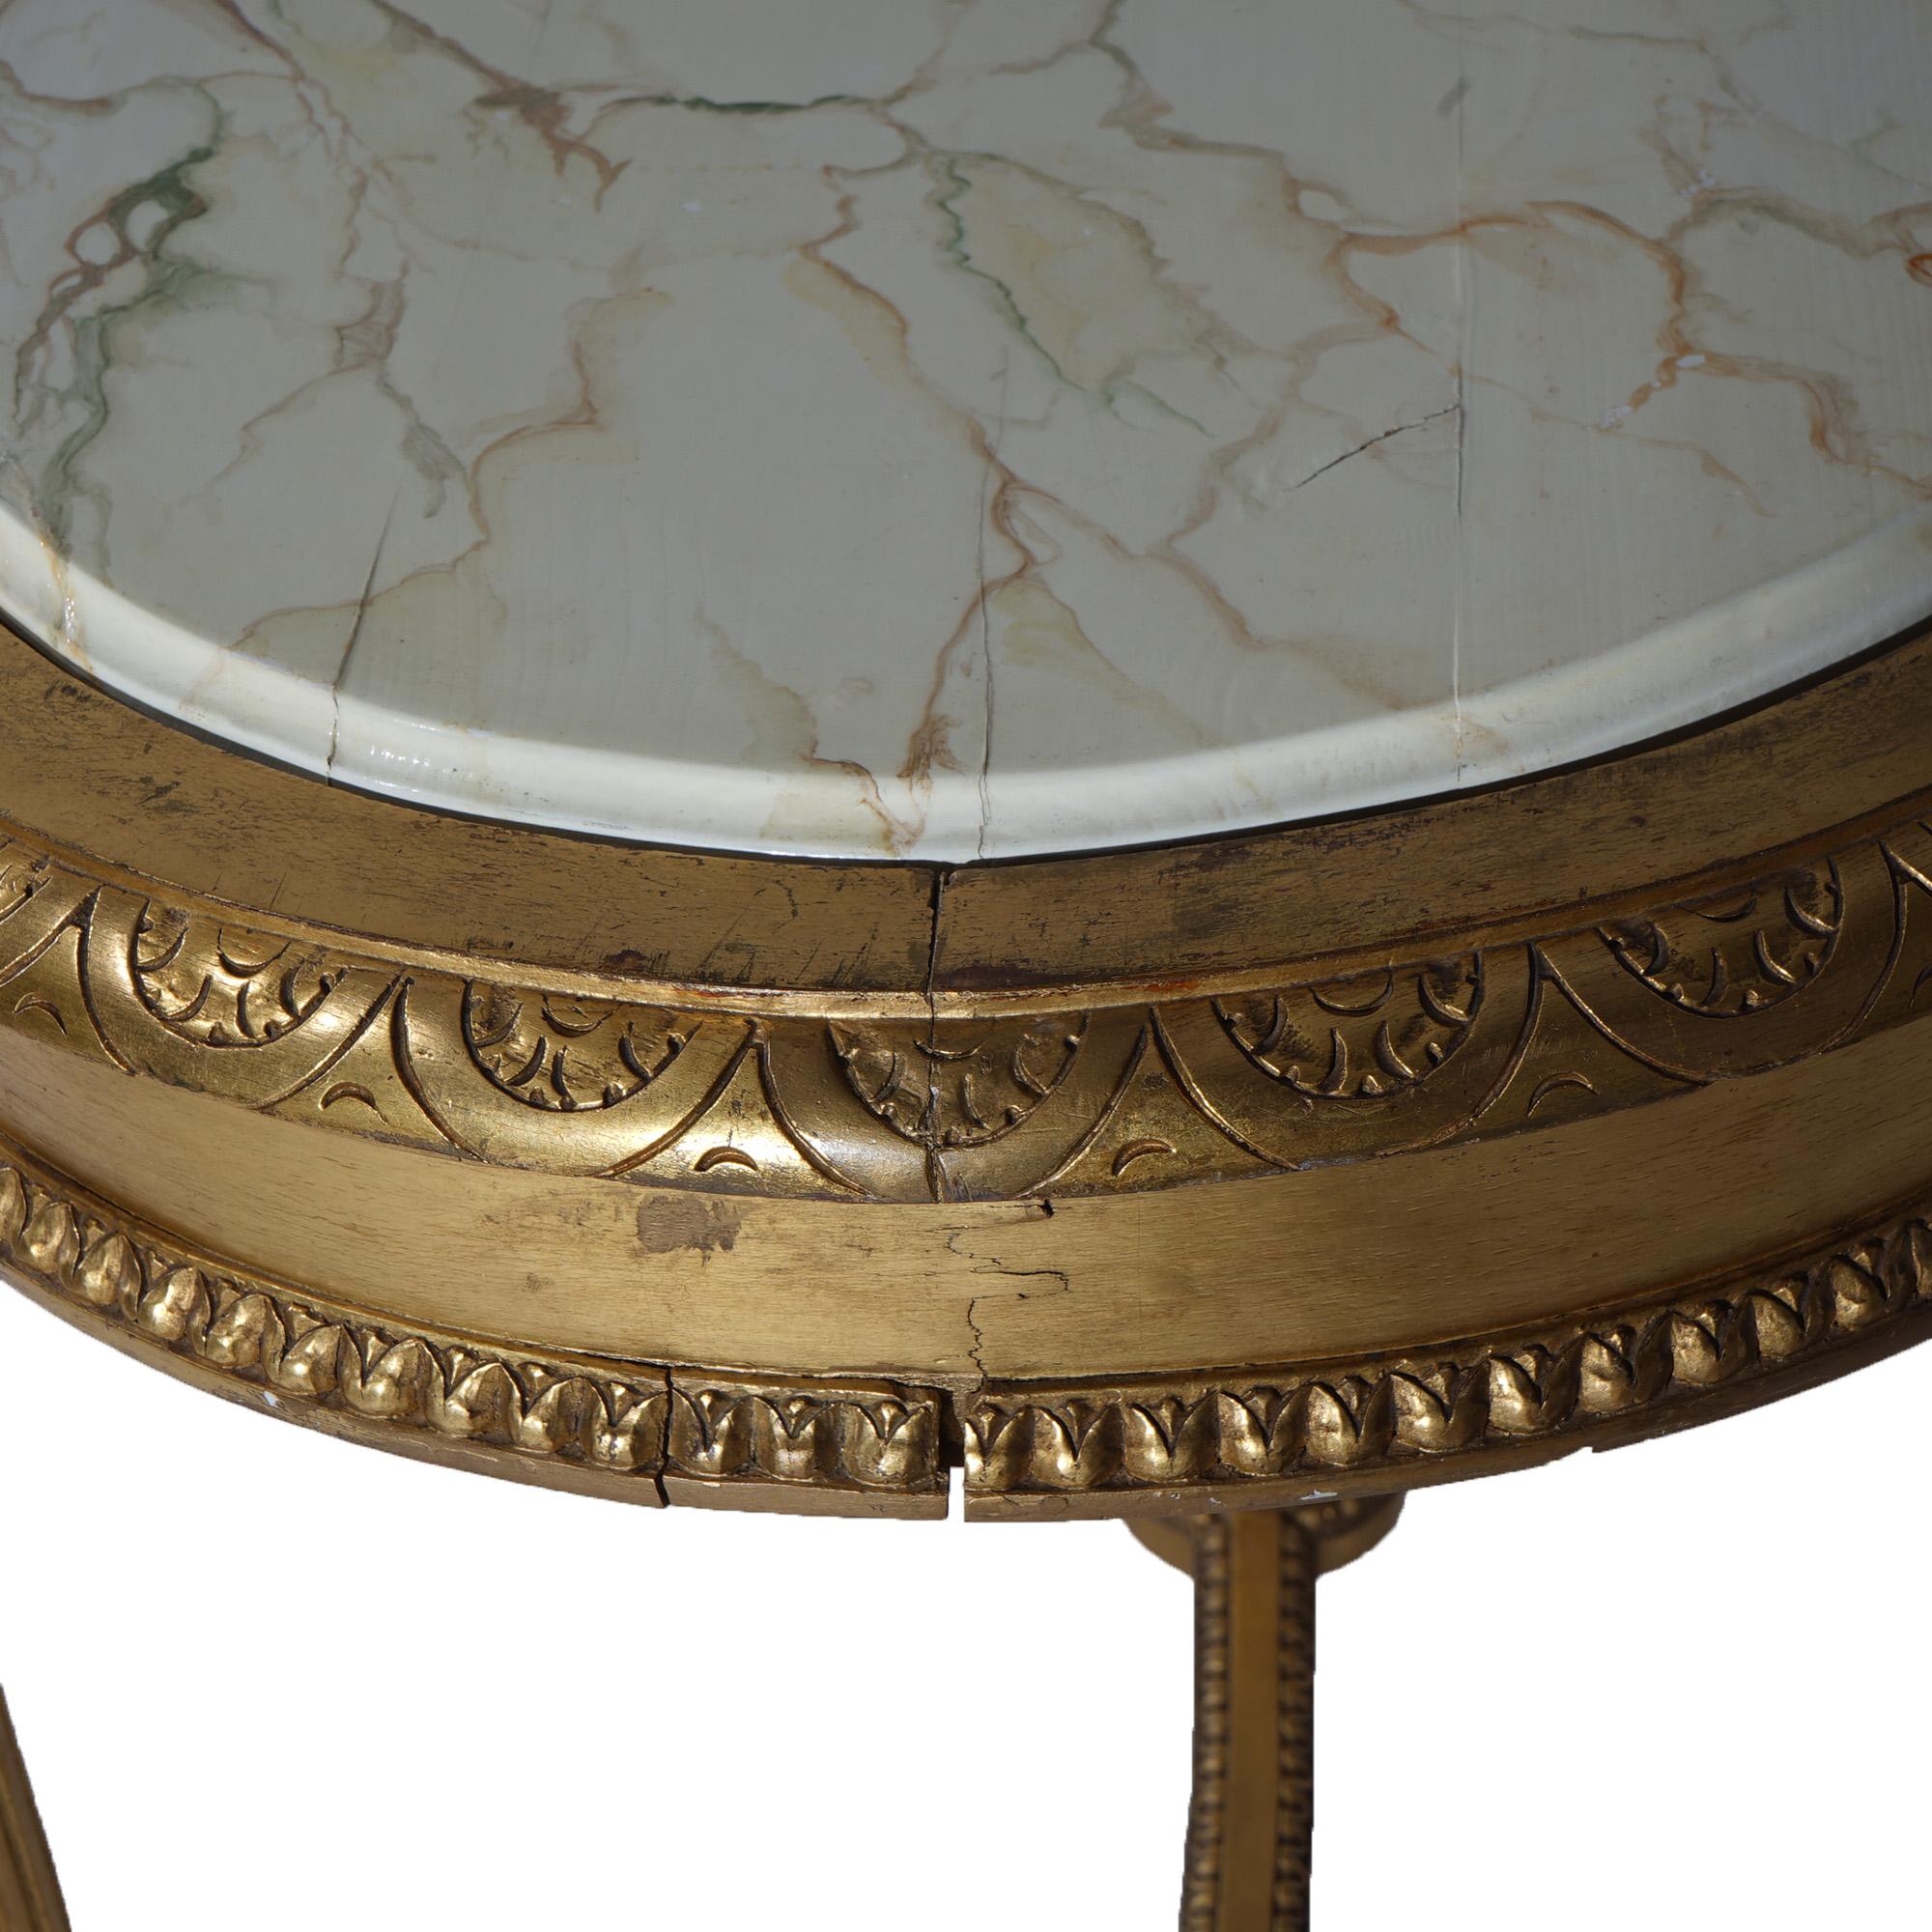 Antique French Louis XVI Style Giltwood Parlor Table with Faux Painted Top 19thC For Sale 7